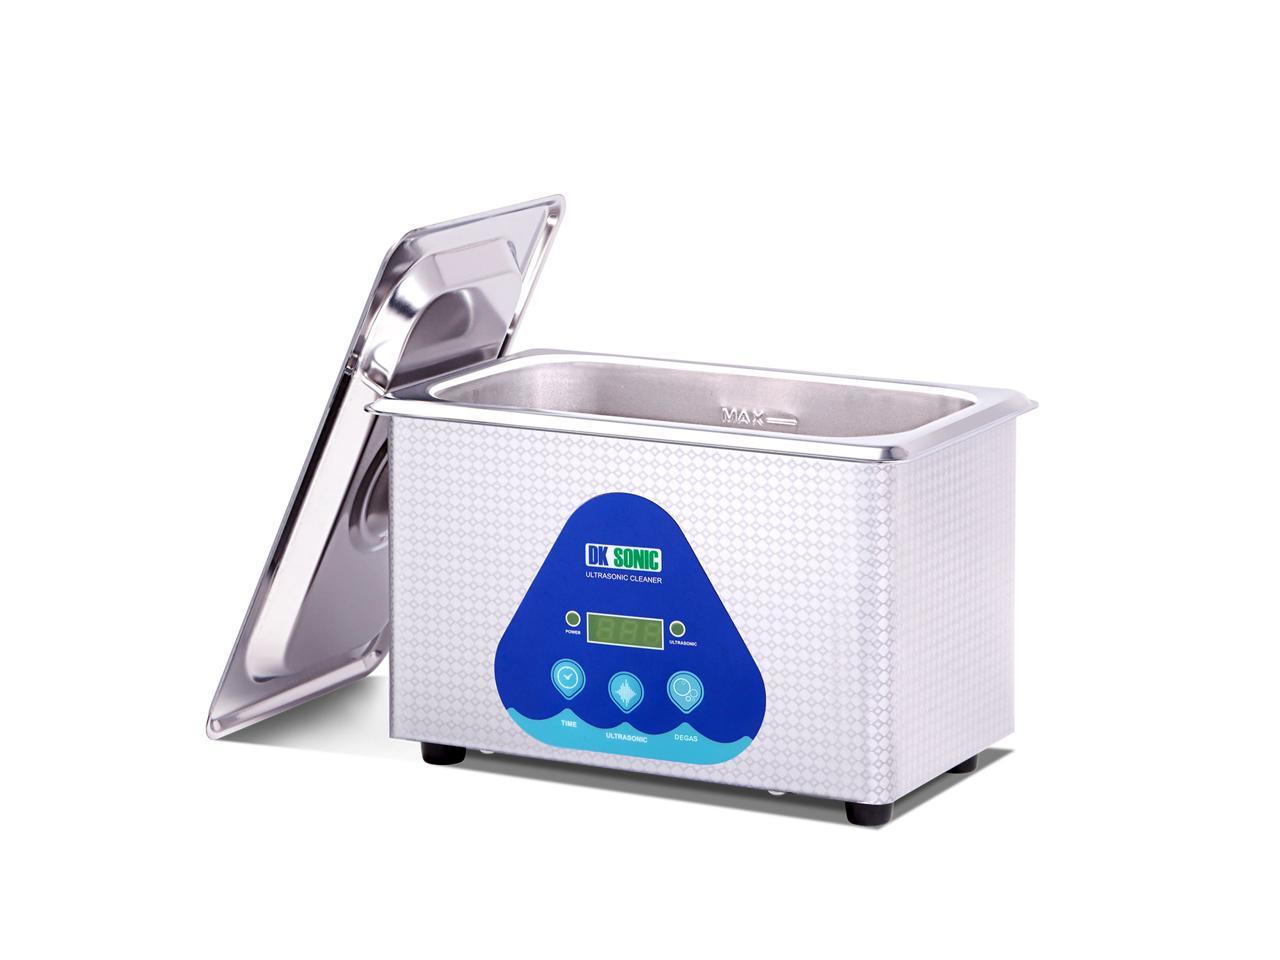 DK SONIC Ultrasonic Cleaner with Heater and Basket for Denture,Coins,Small Metal 